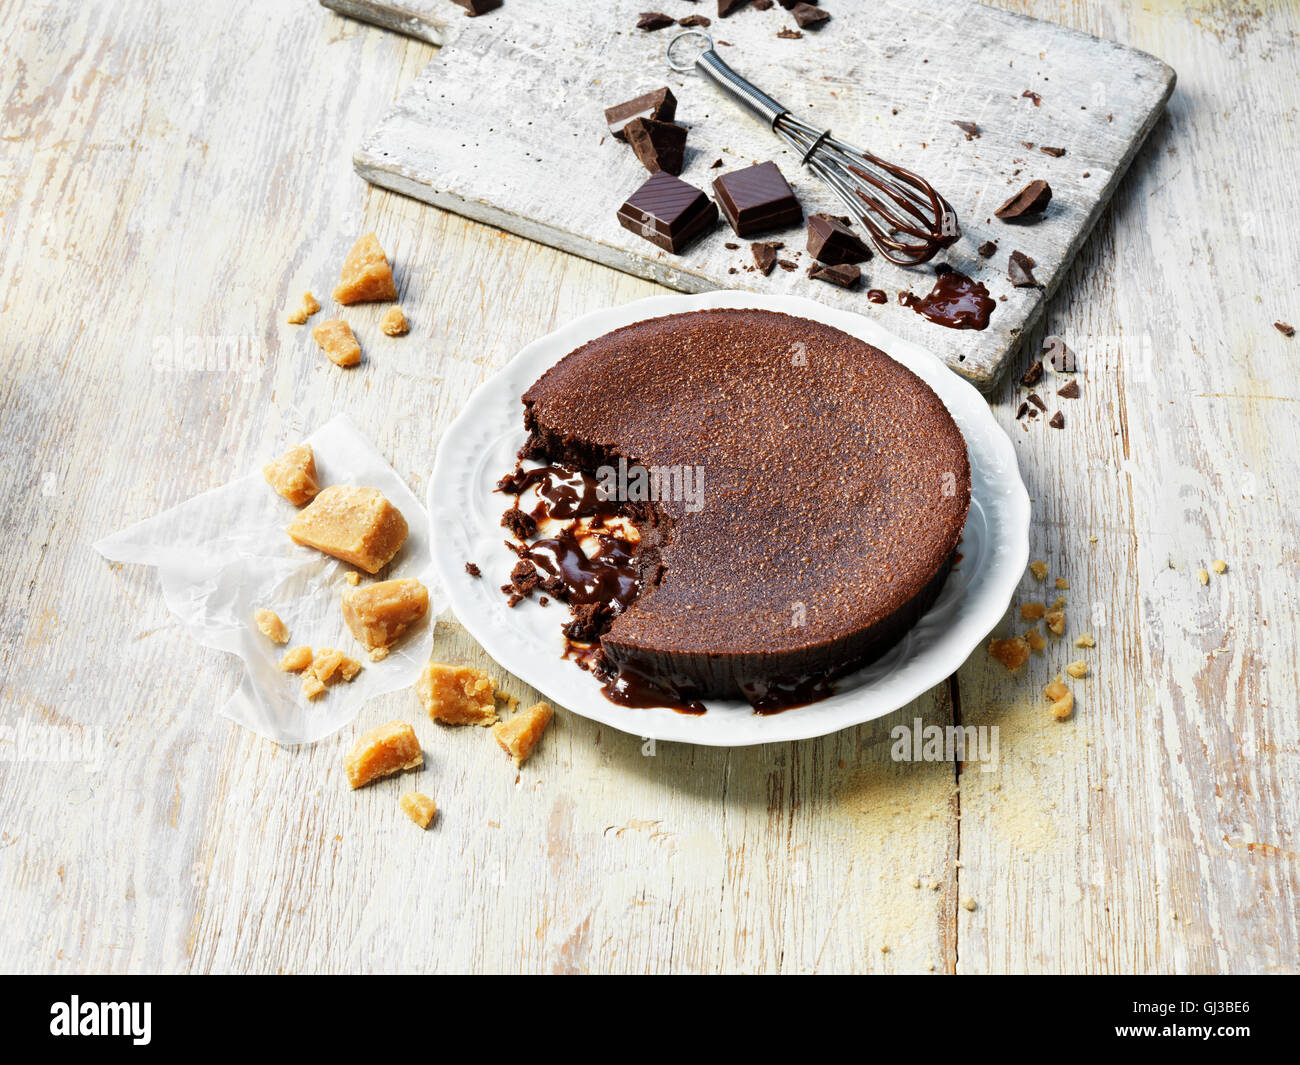 Hot chocolate fudge pudding, crumbly fudge, pieces of chocolate, whisk, white washed wooden table and chopping board Stock Photo